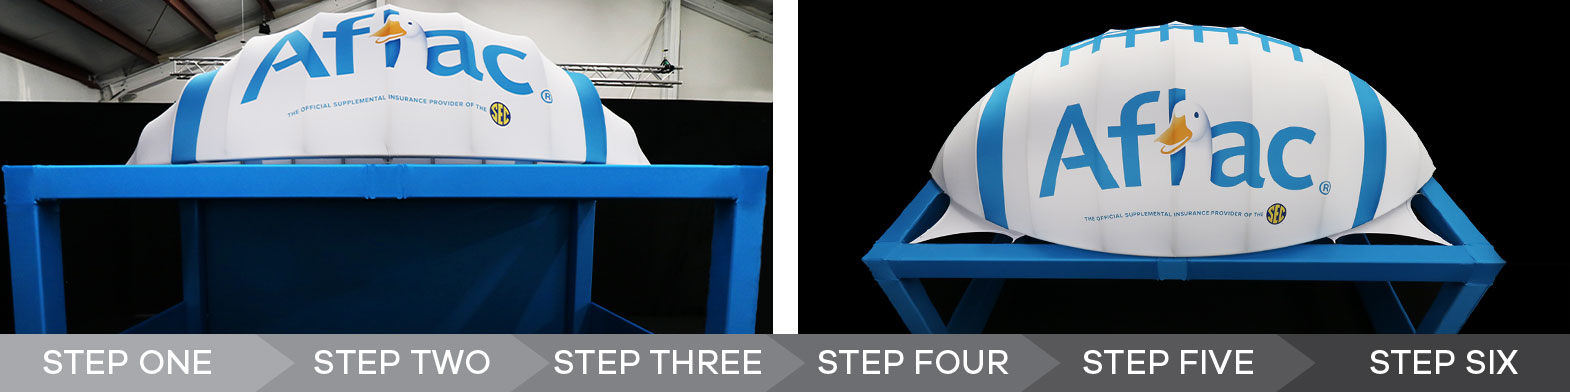 Two photos of the custom half-football and truss cover structure created for Aflac